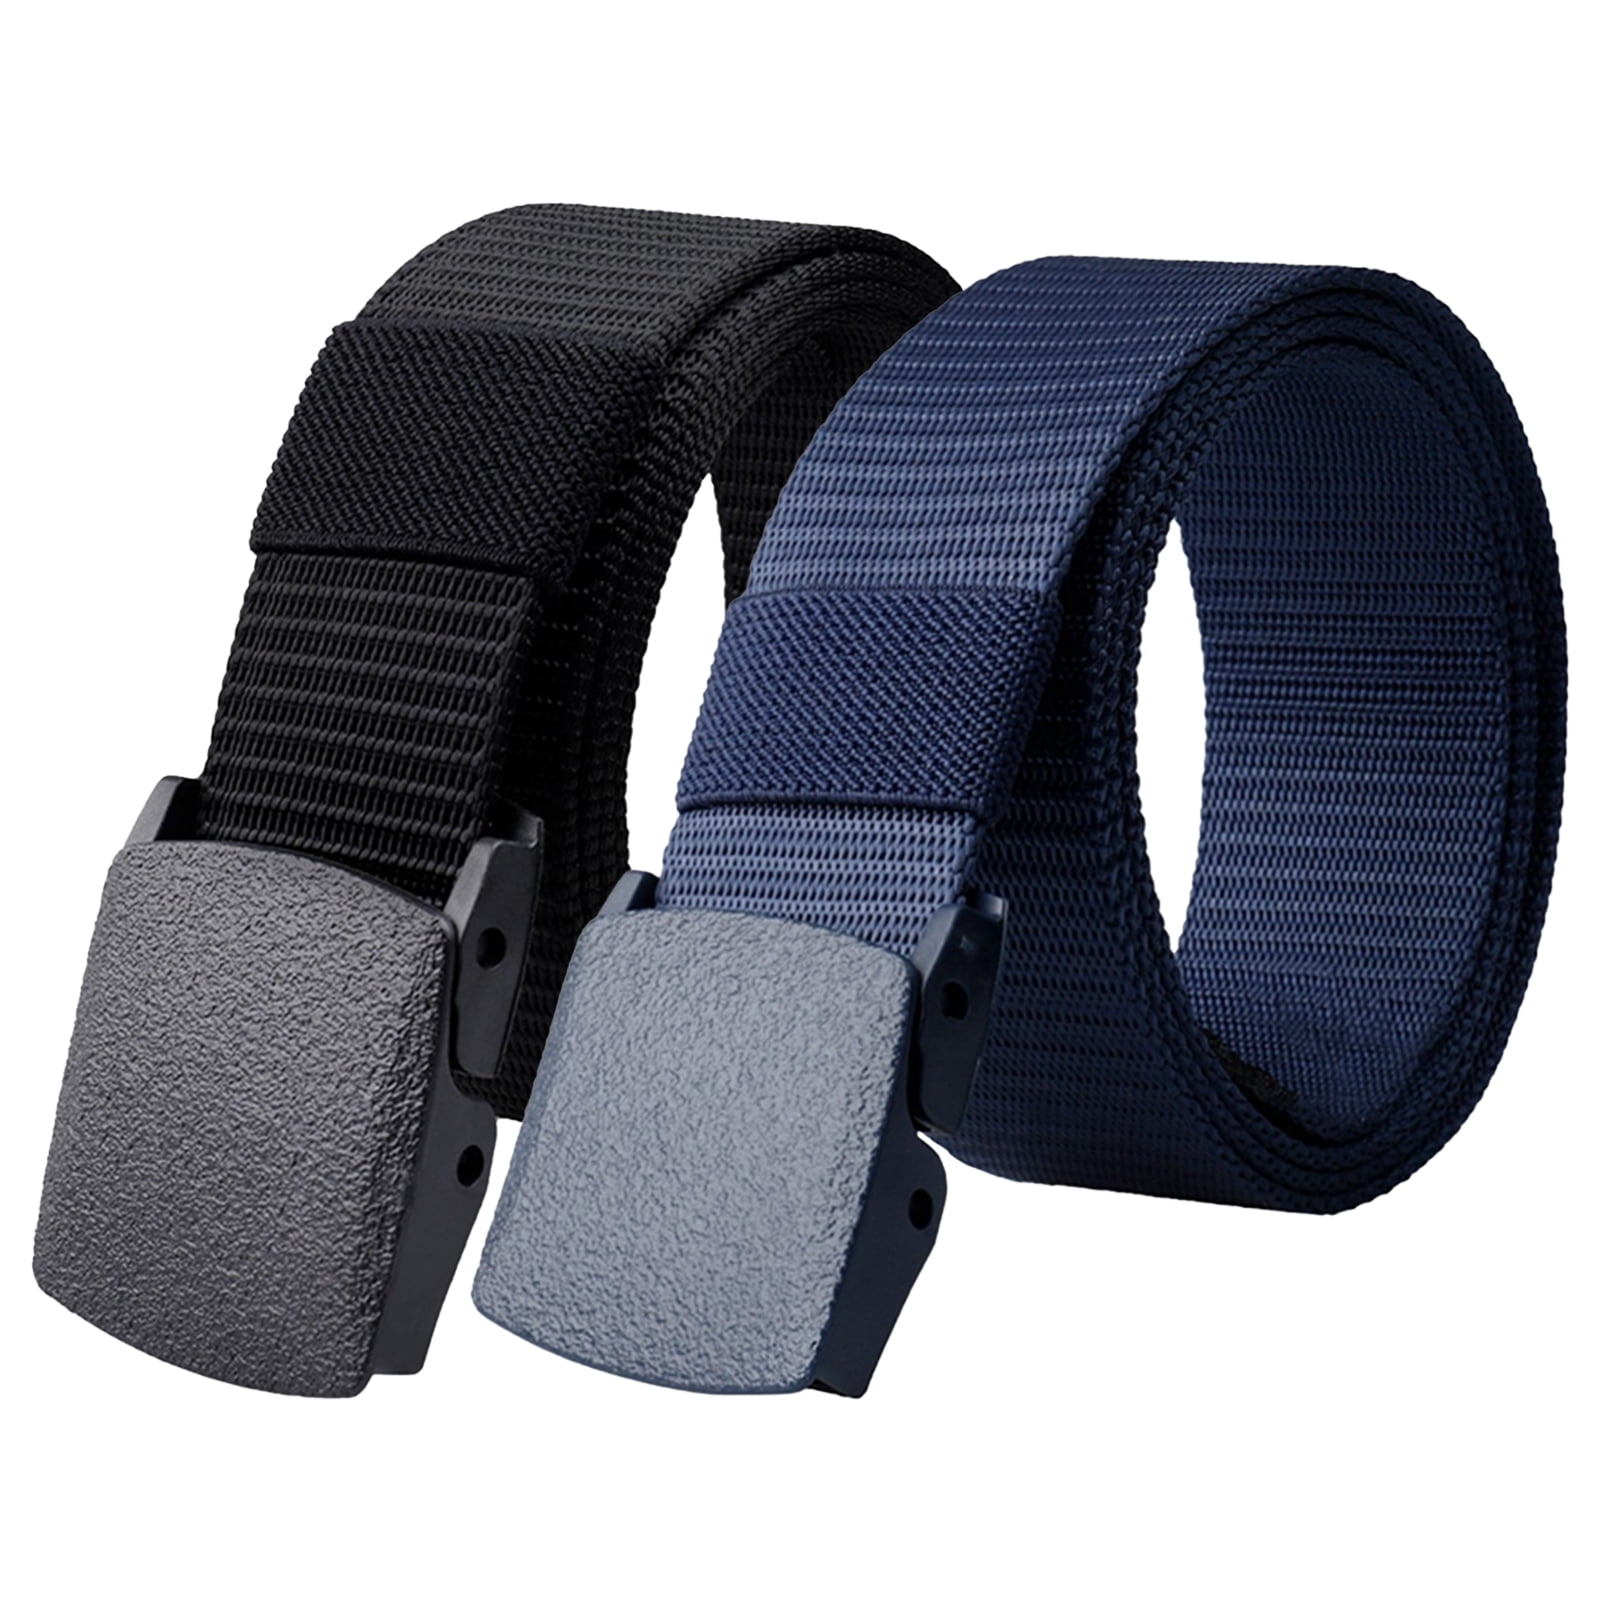 Men's Nylon Canvas Work Belt, 1.49 Inches Tactical Military Plastic 2 Pack 